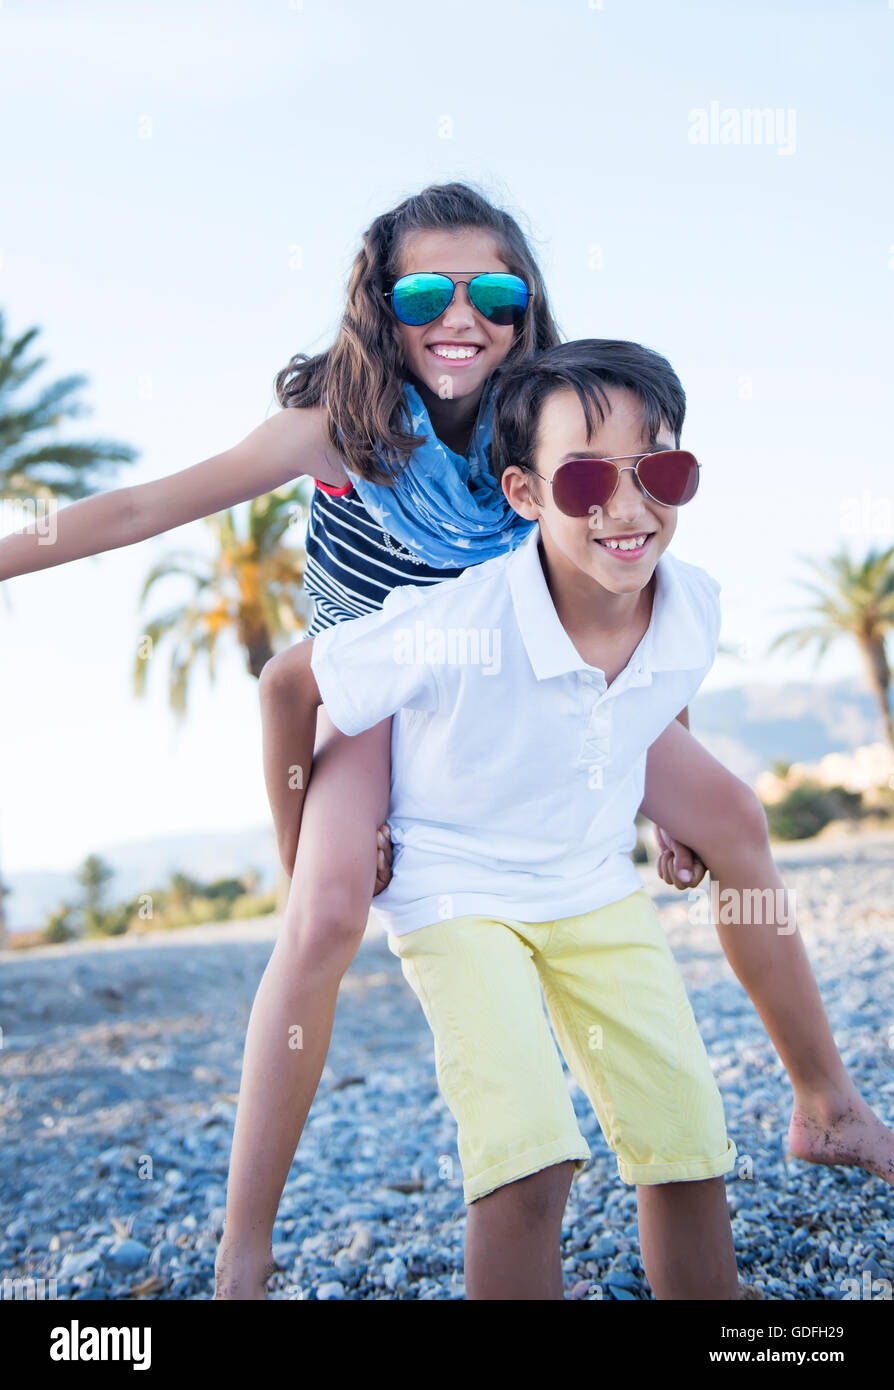 Cheerful cute boy and girl playing outdoors Stock Photo